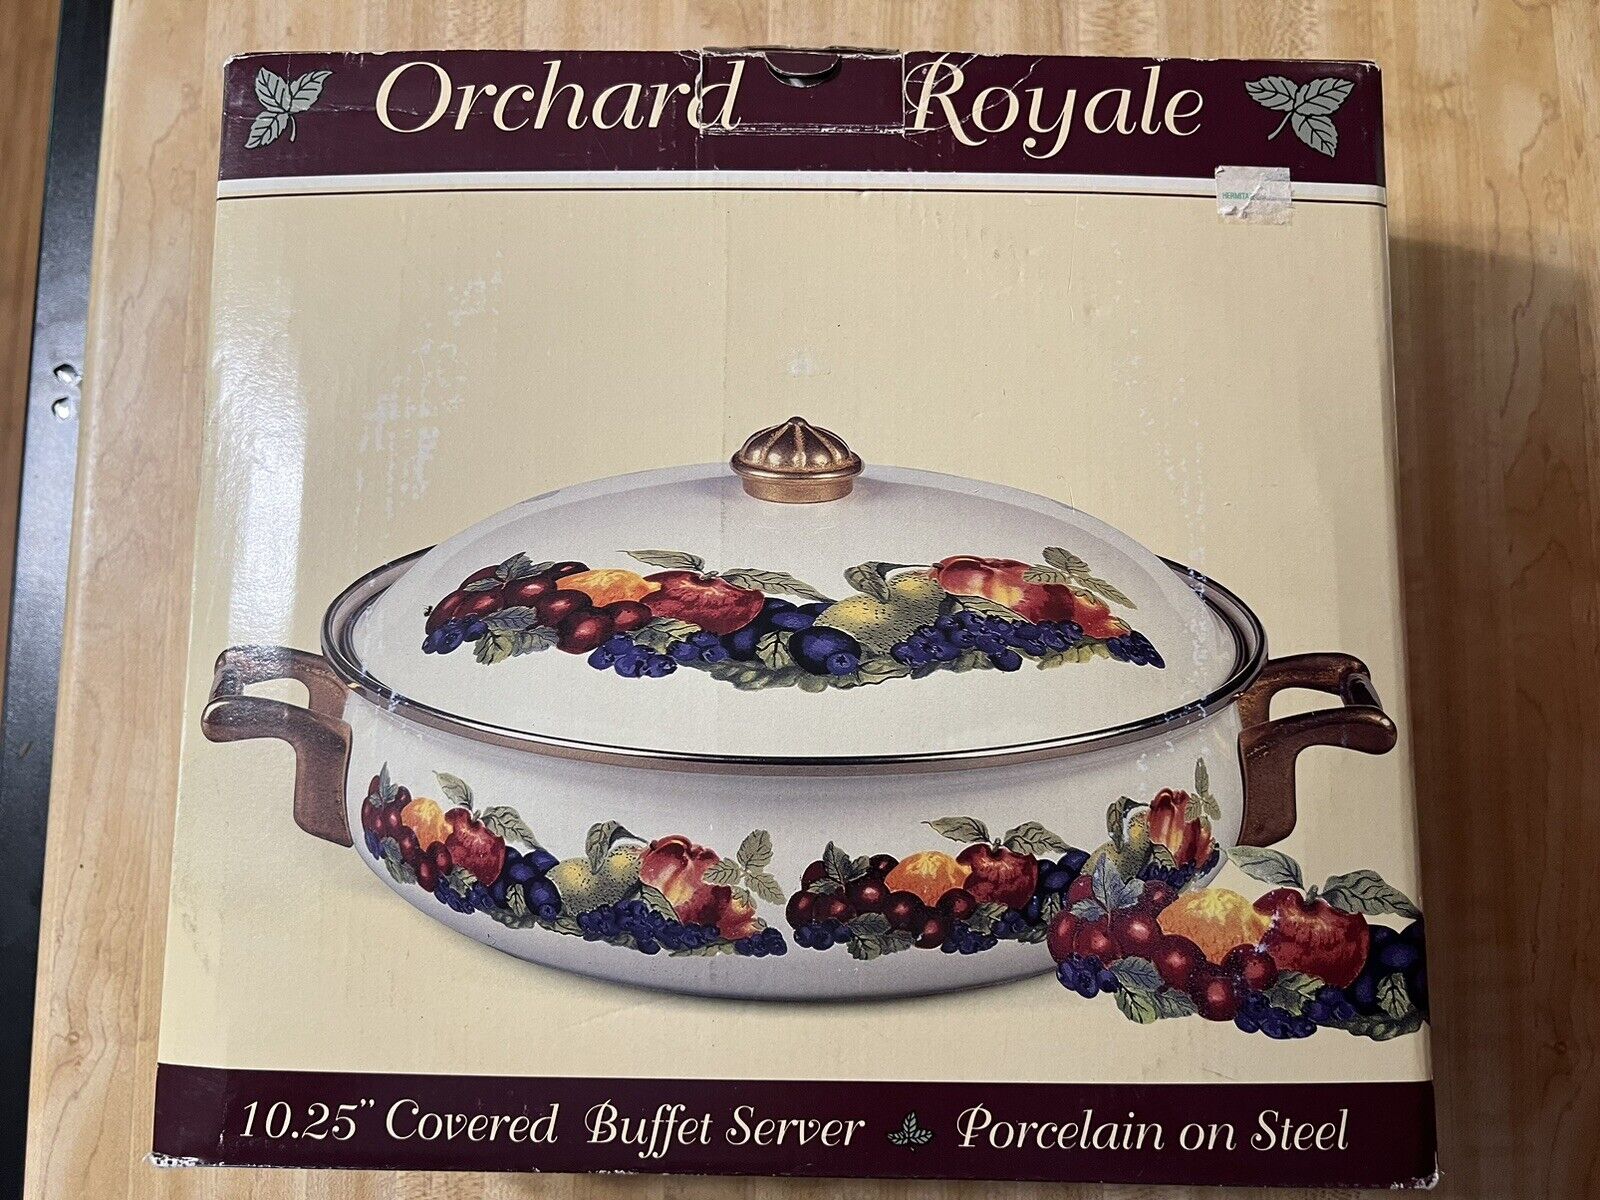 New In Box Vintage Lincoware 'Orchard Royale' Dutch Oven Enamel Pot with Lid